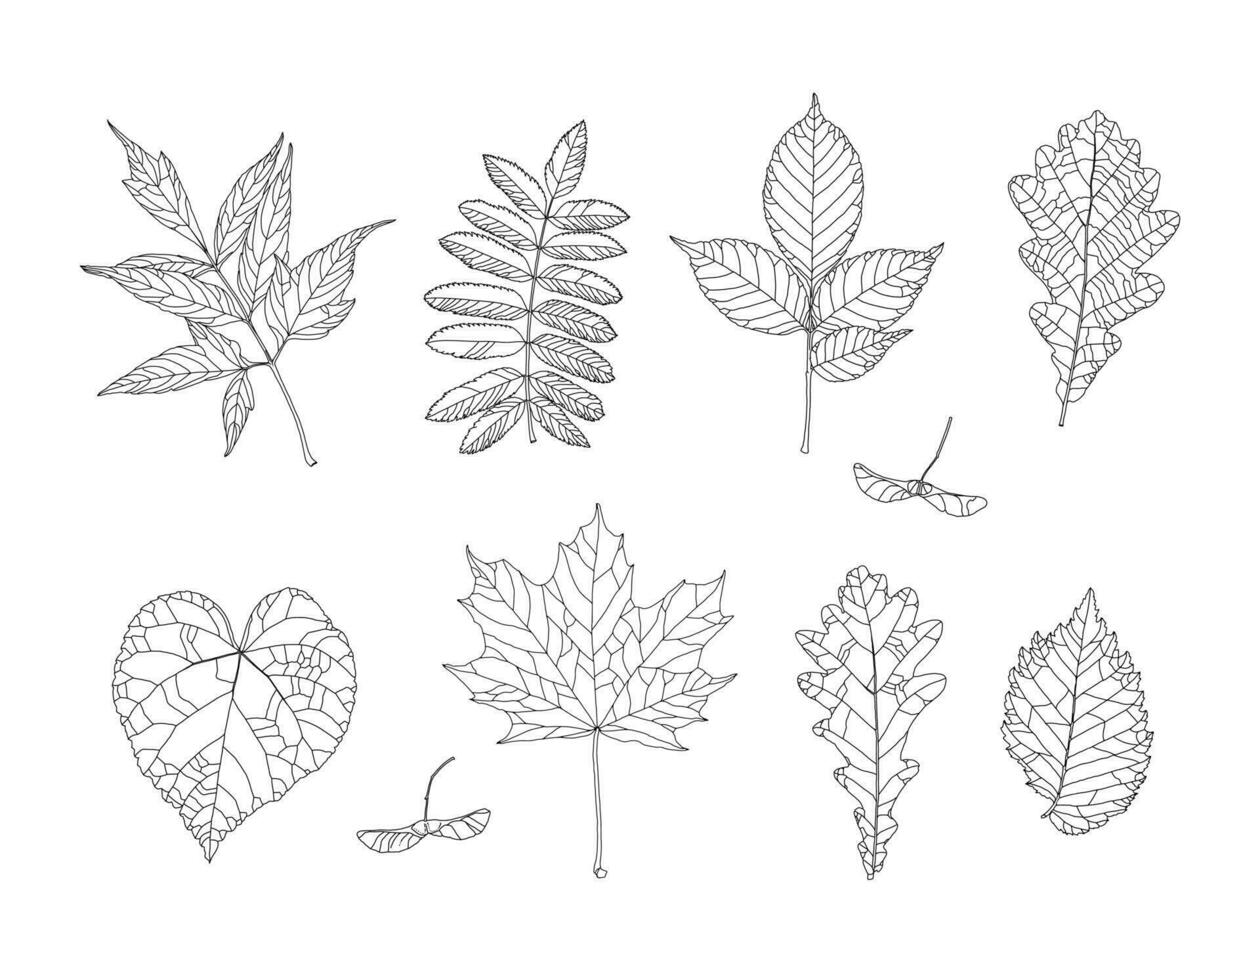 Autumn drawing leaves set. Isolated objects. Hand drawn illustrations - maple, maple seeds, ash leaved maple, rowan, ash, oak, linden, elm. Fall seasonal decor. Elements for design in line art style vector